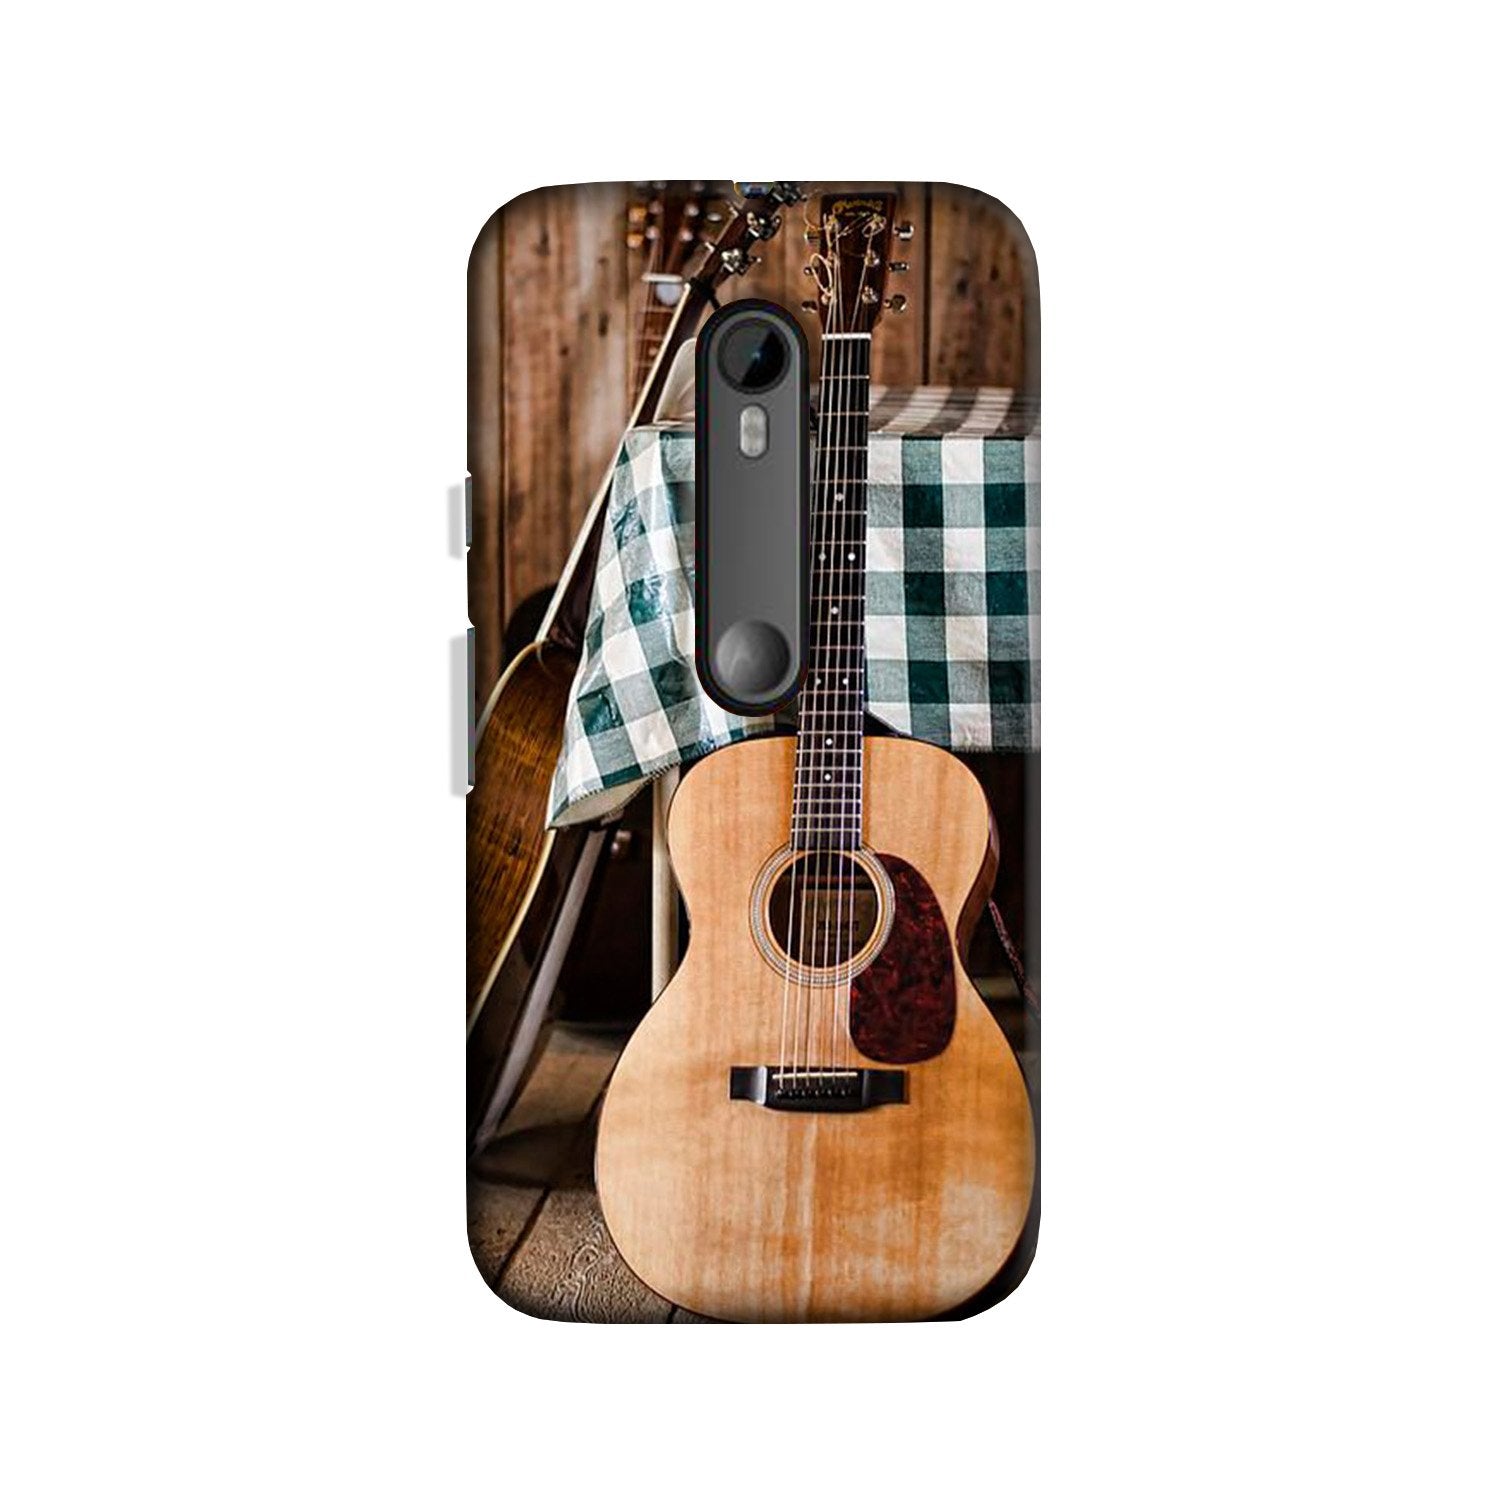 Guitar2 Case for Moto X Play